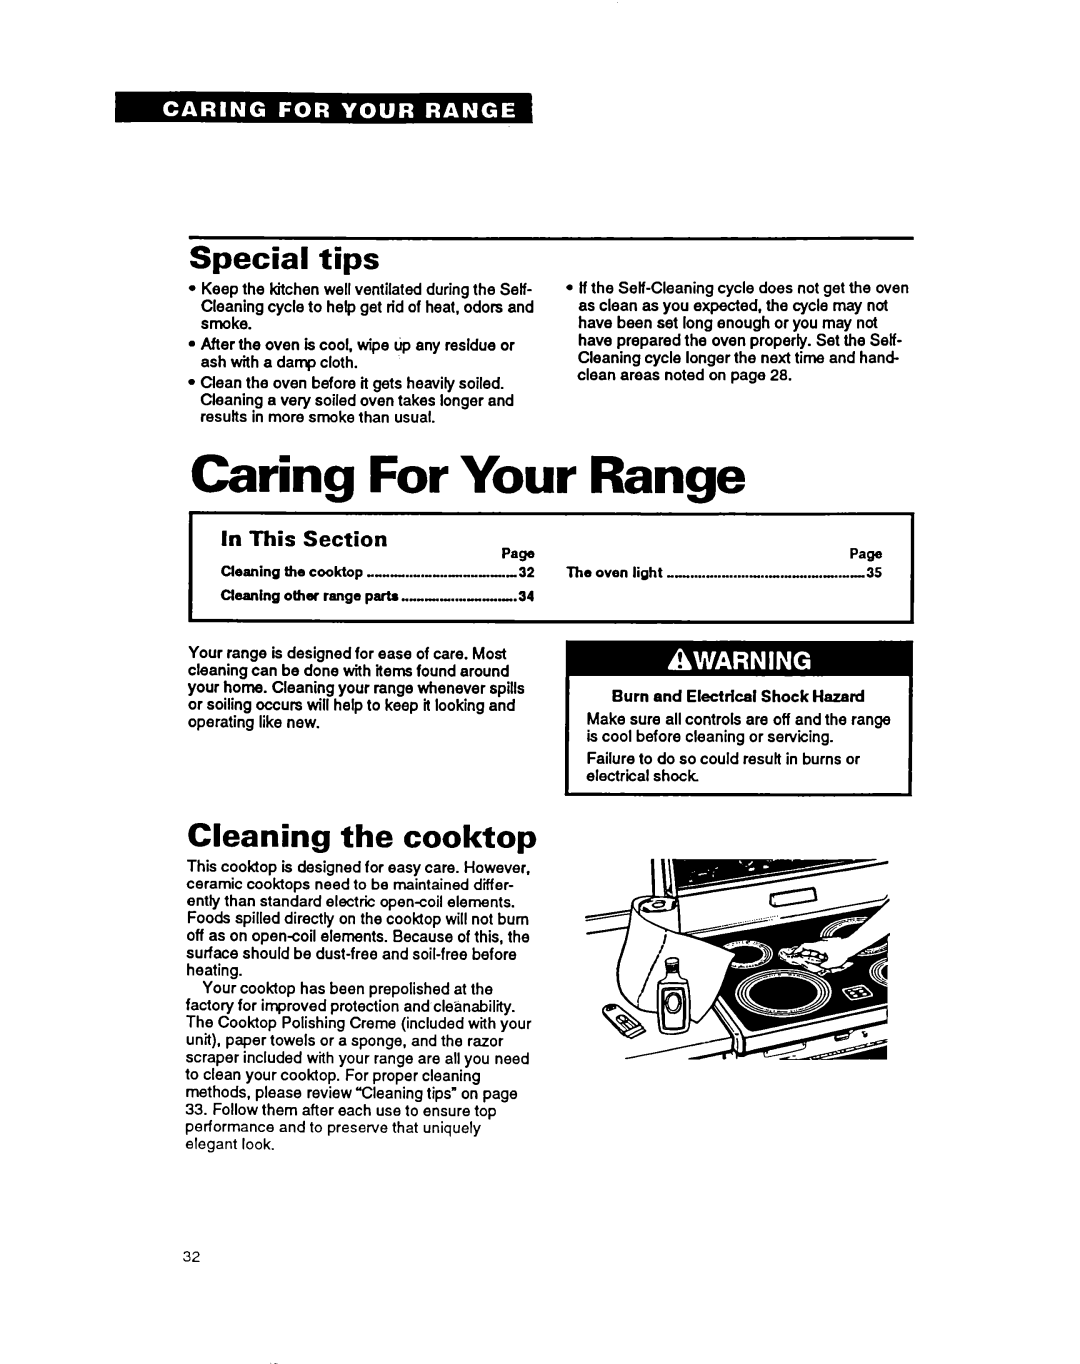 Whirlpool RF376PXY warranty Caring For Your Range, Special tips, Cleaning the cooktop, In This, Section, Page 